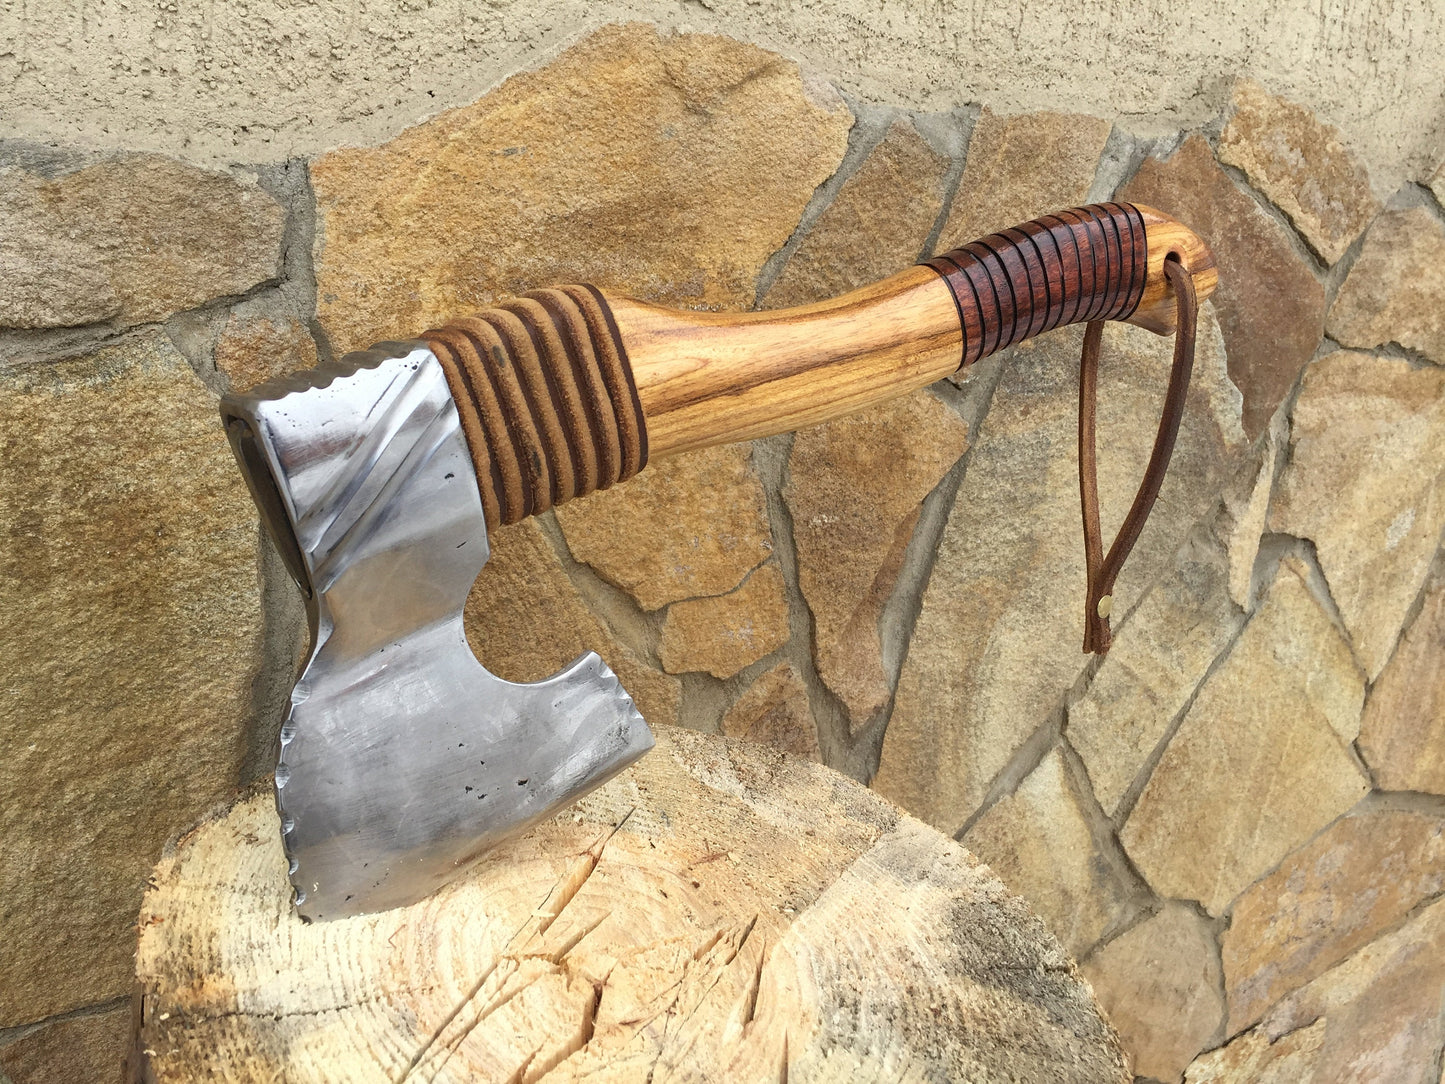 Sharp axe, viking axe, viking hatchet, cutting tools, camping axe, brother axe gift, grandpa axe gift, mothers day gift, survival products